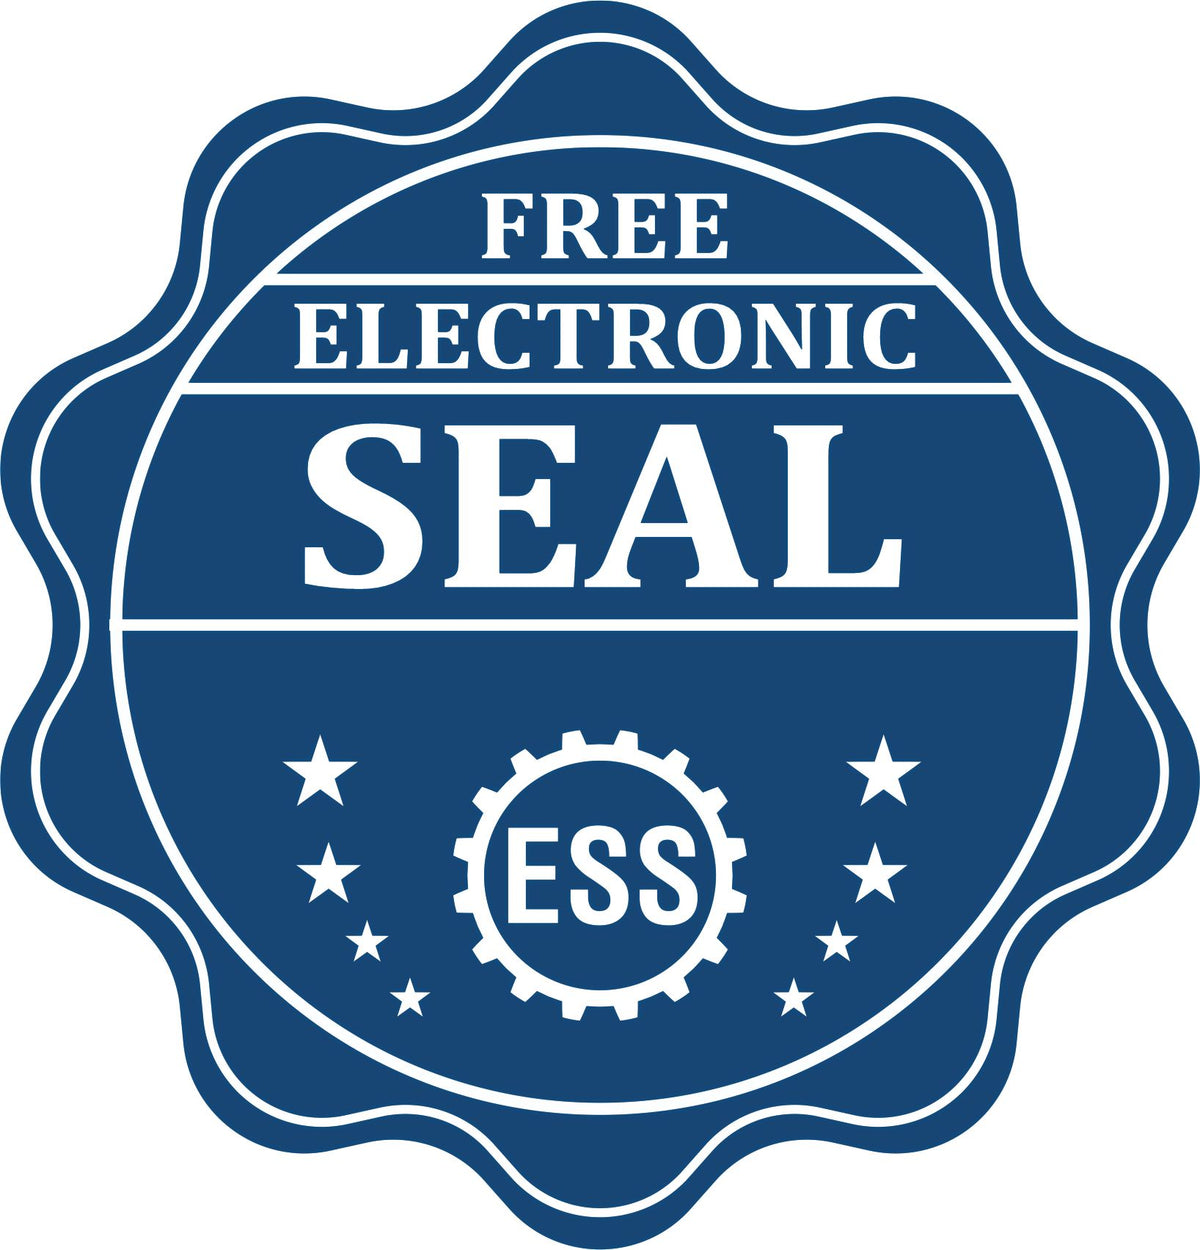 A badge showing a free electronic seal for the Hybrid Washington Architect Seal with stars and the ESS gear on the emblem.